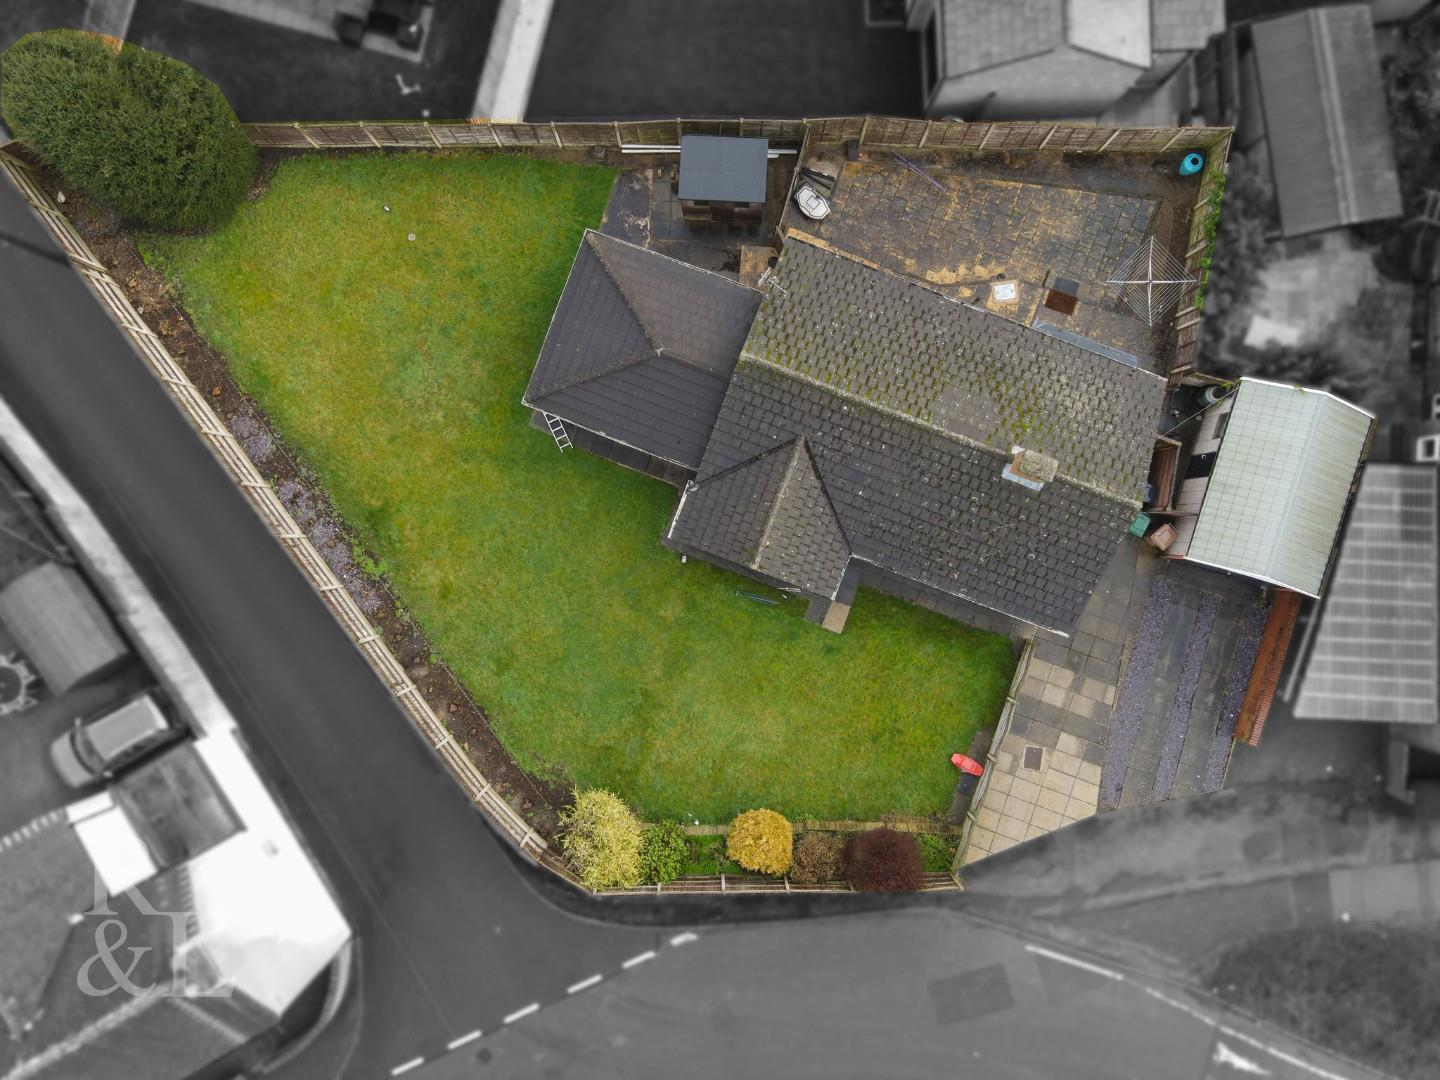 Property image for Meadow Lane, Newhall, Swadlincote